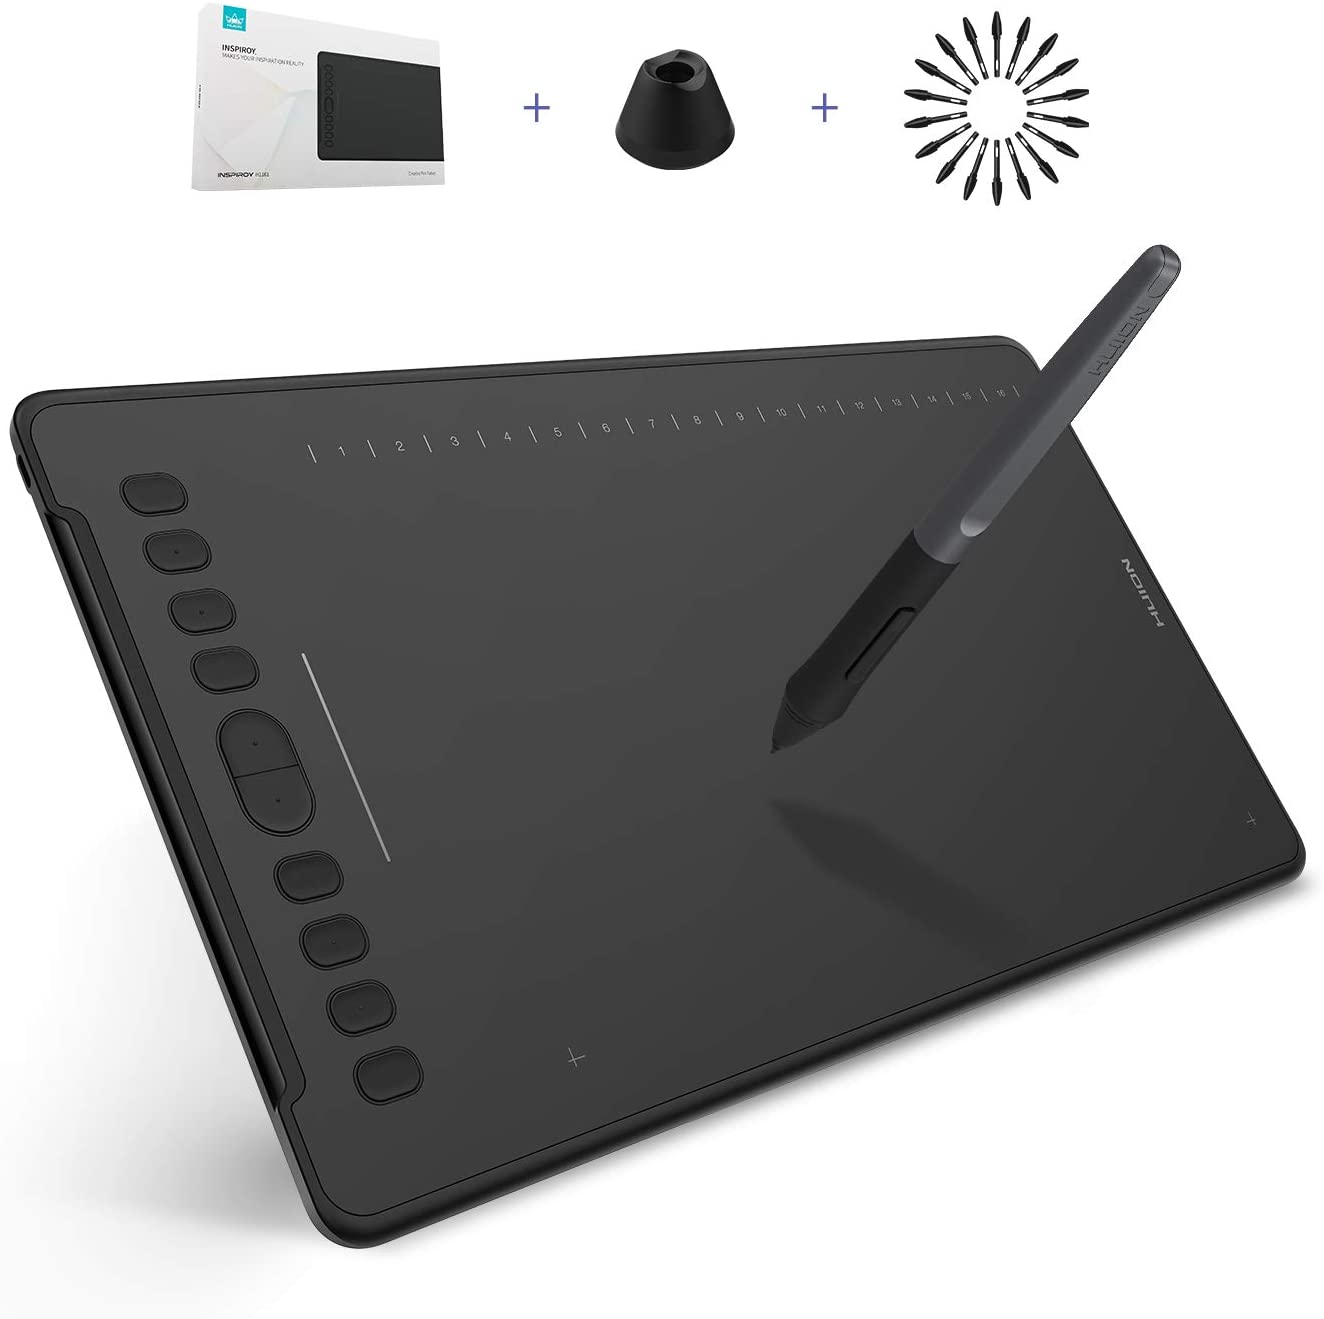 HUION Inspiroy H1161 review